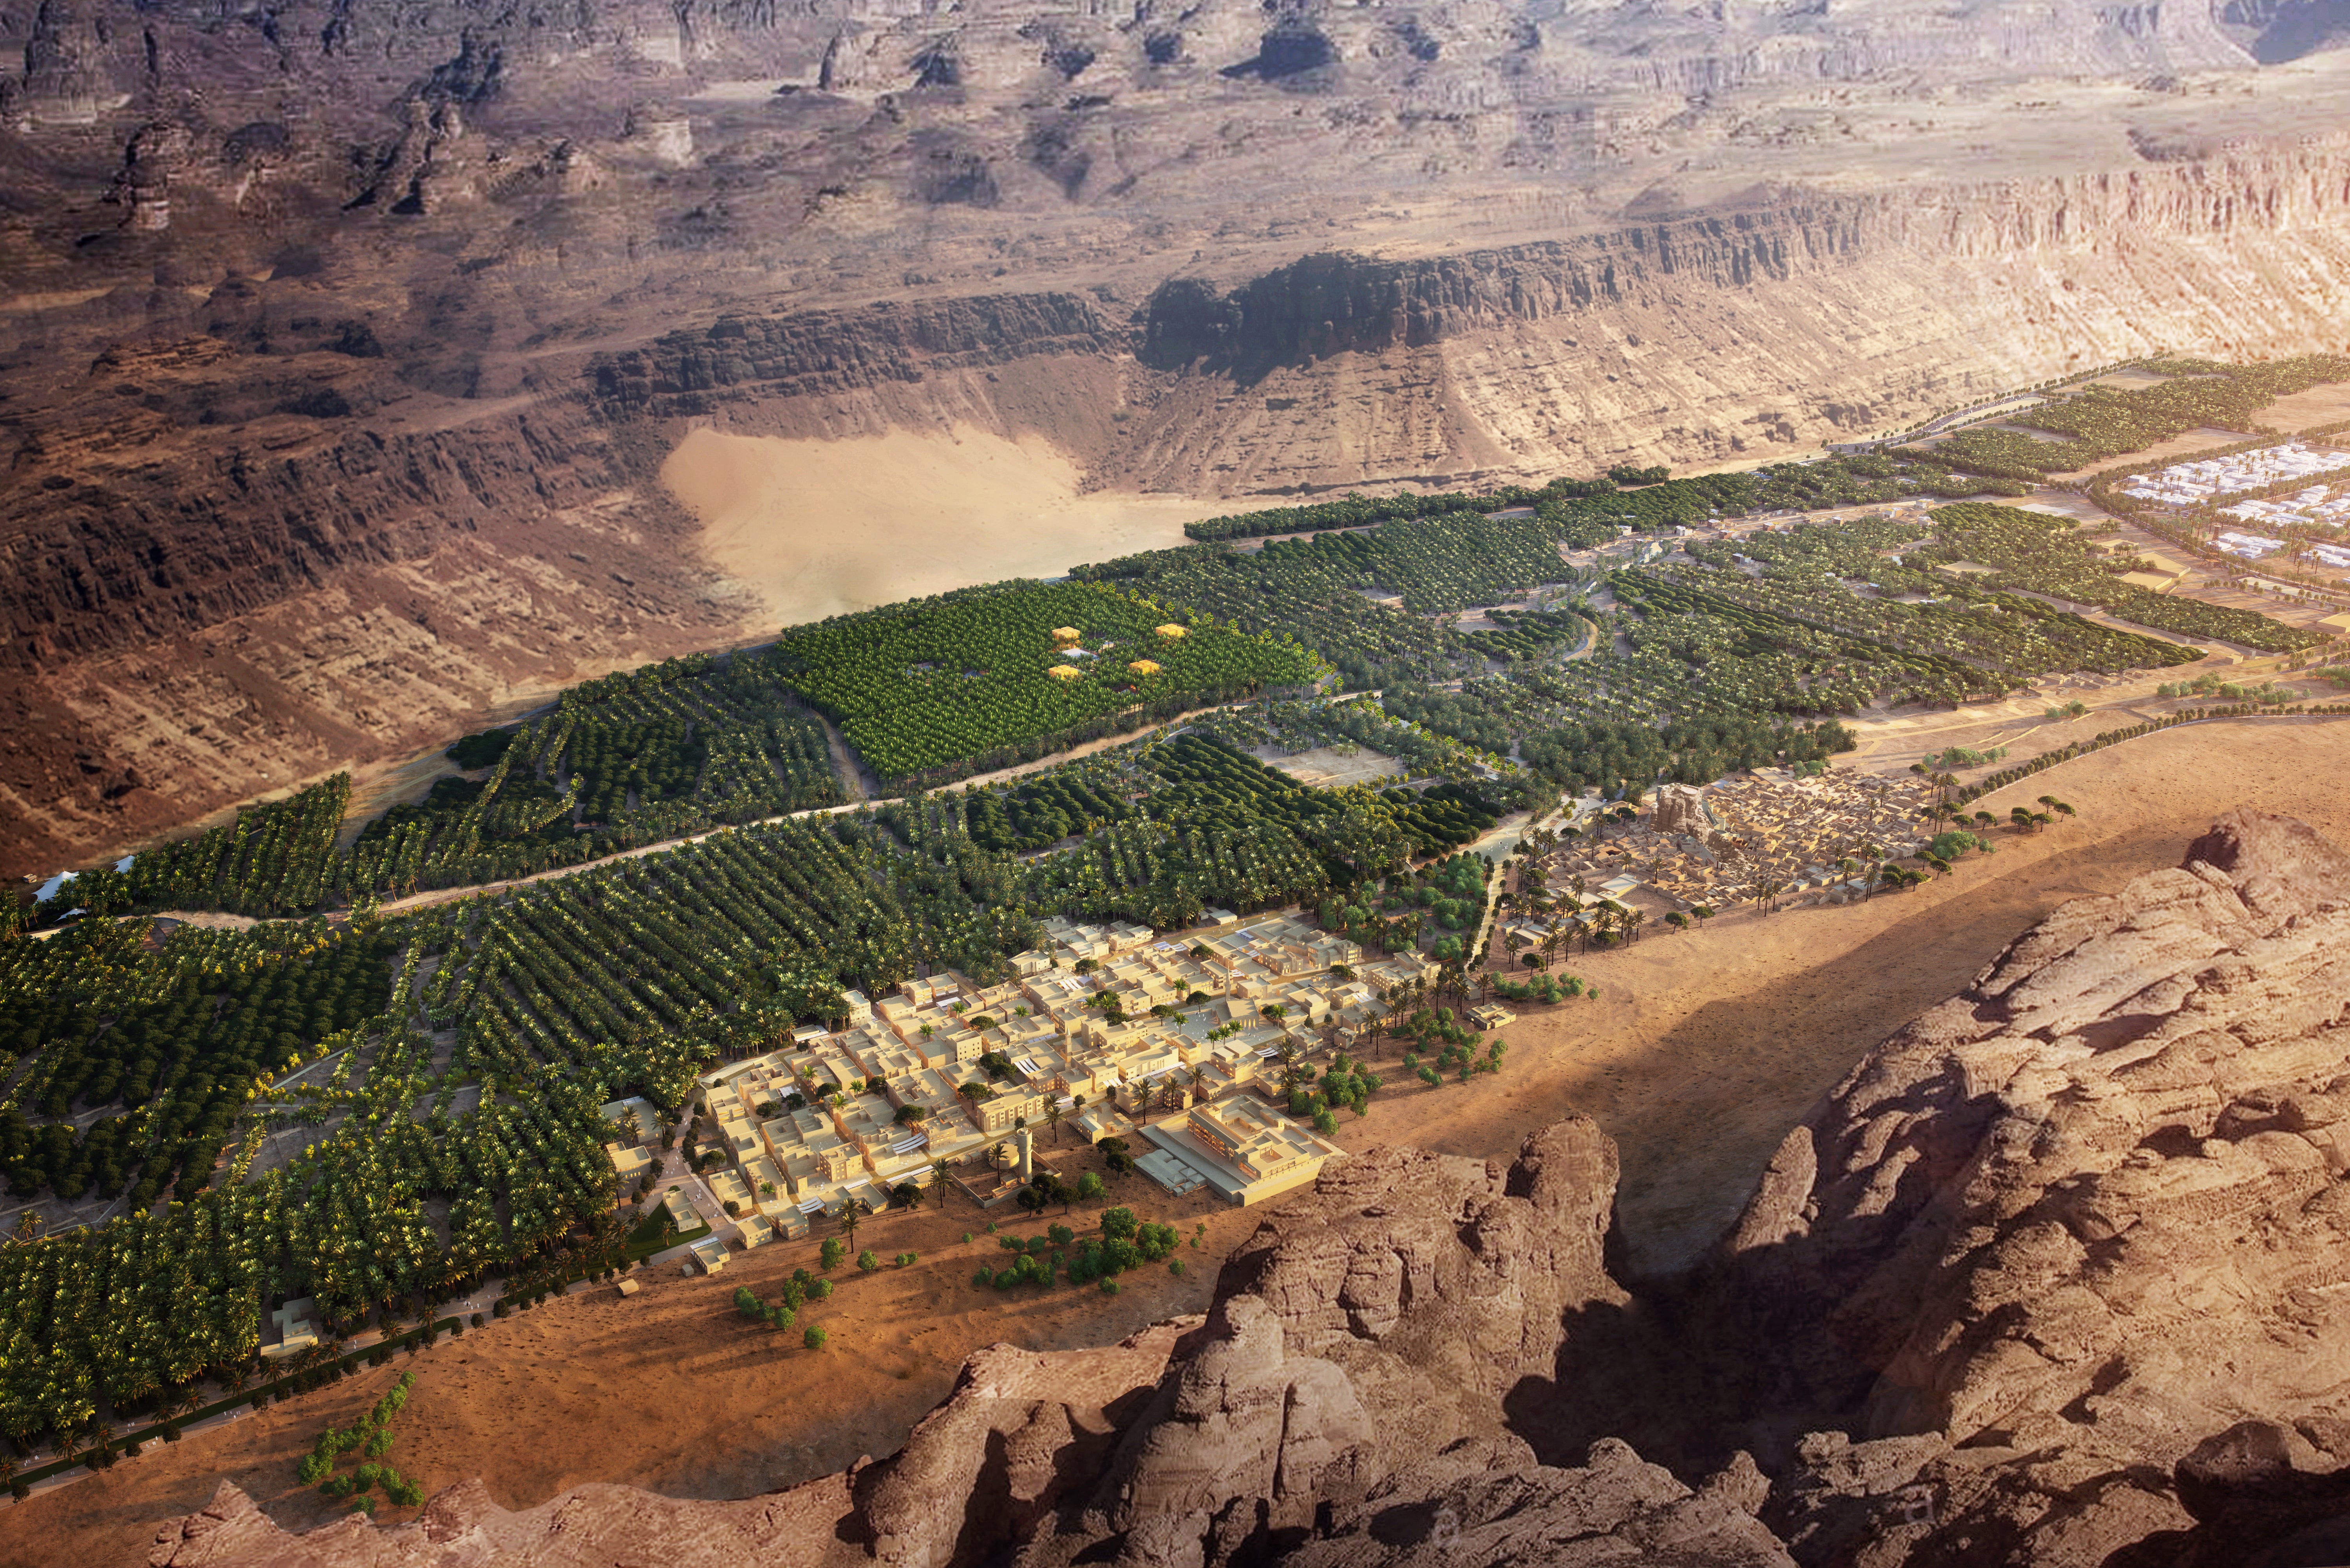 AlUla Old Town is being preserved through the conservation efforts